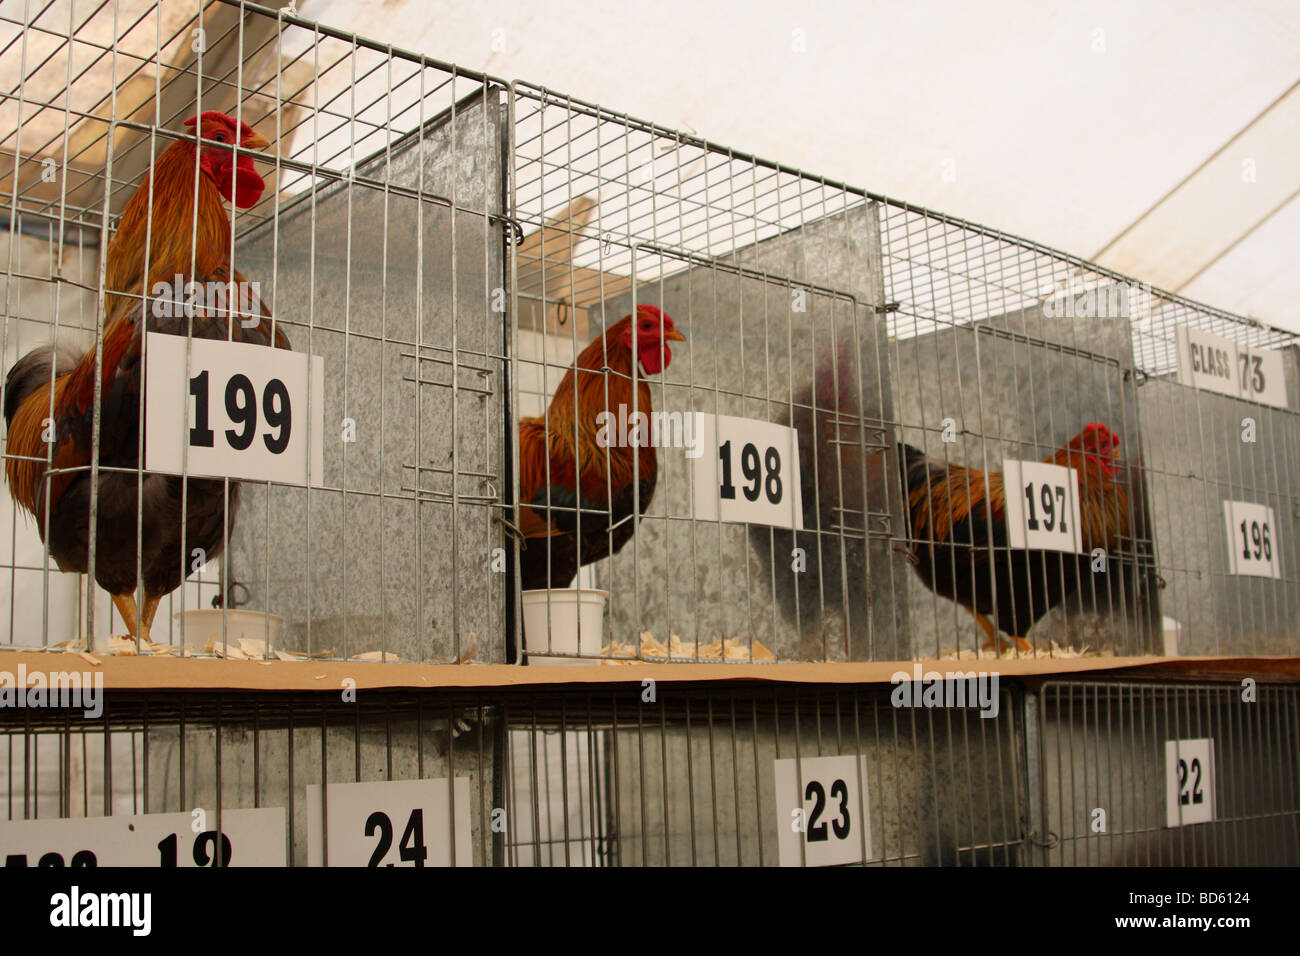 Poultry in cages at the Bakewell Show, Bakewell, Derbyshire, England, U.K. Stock Photo